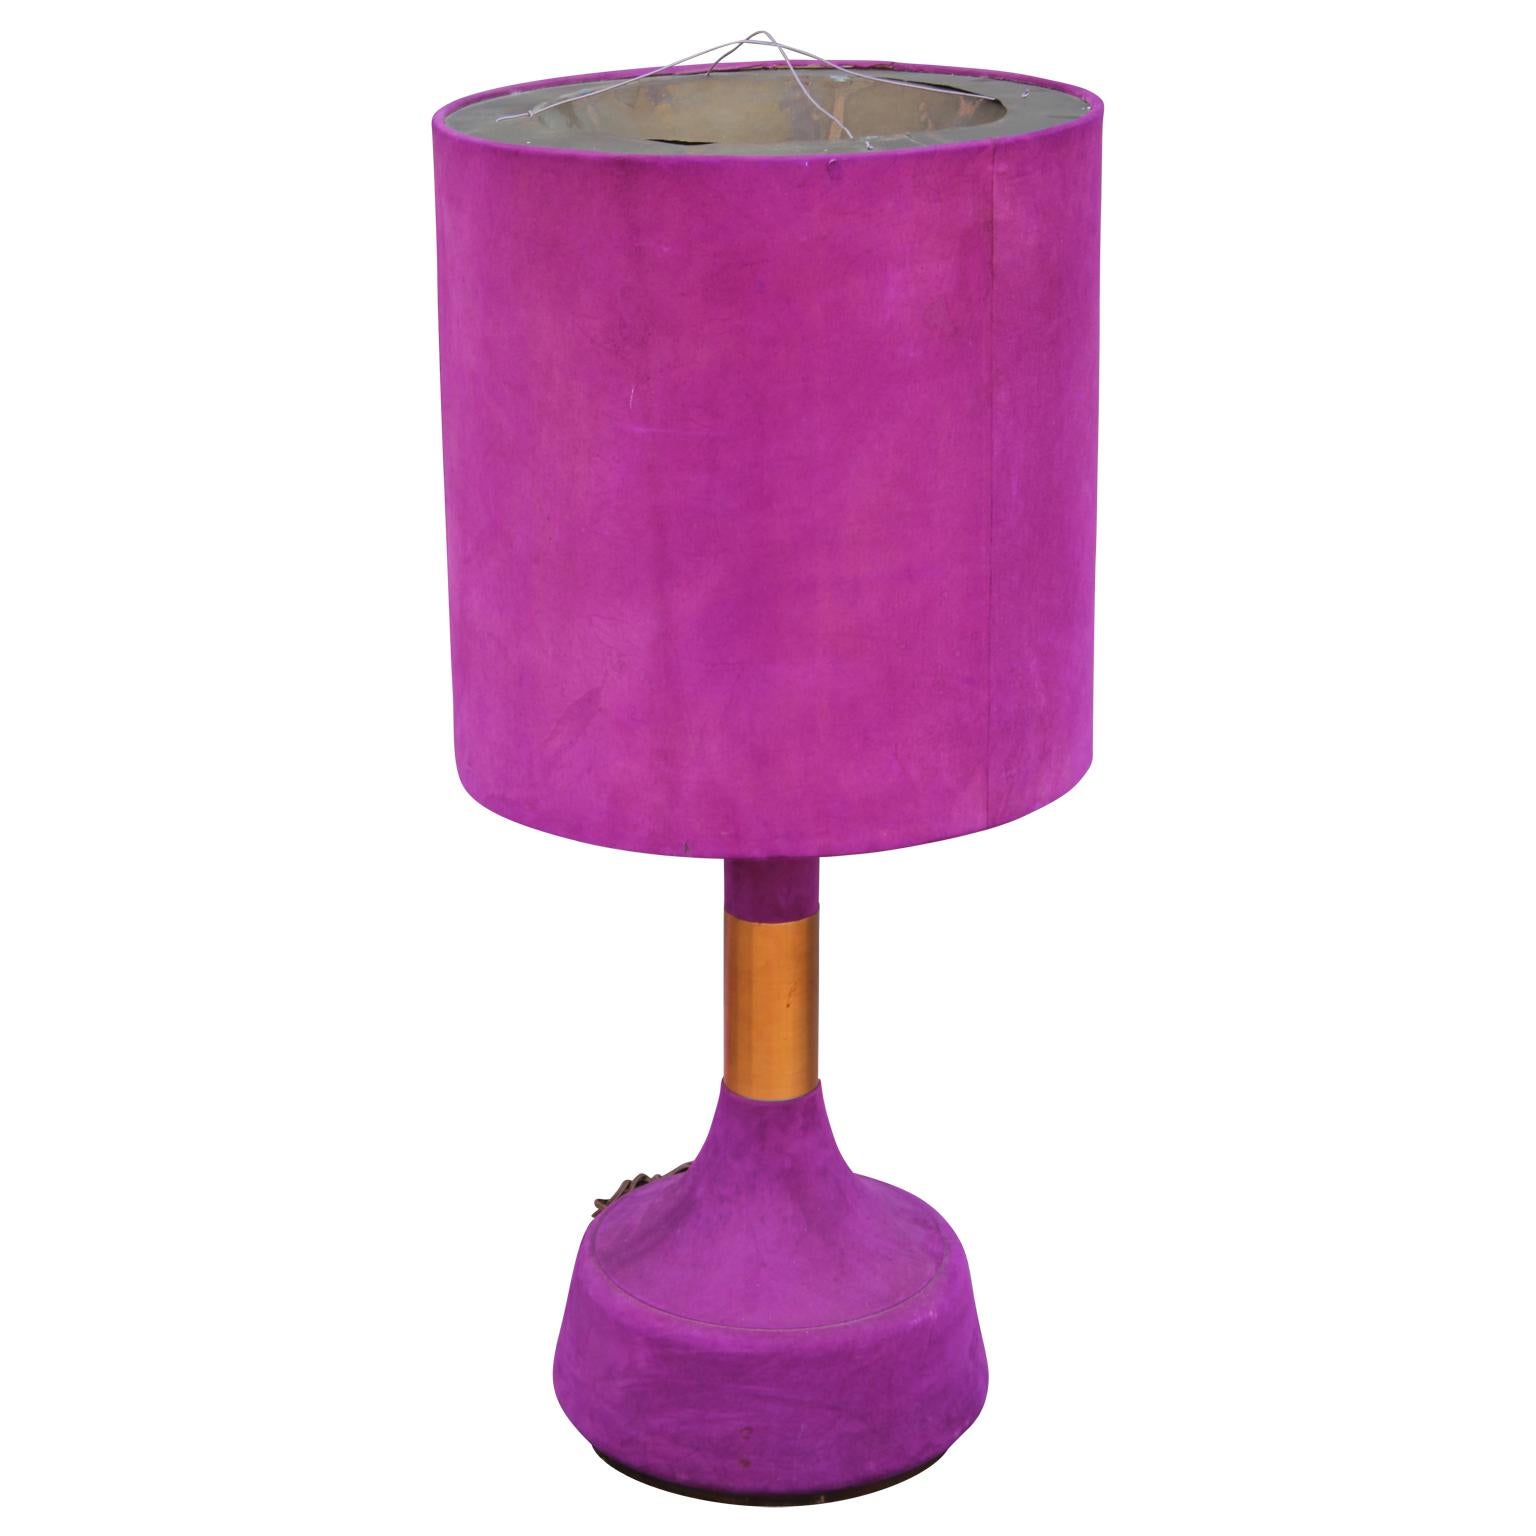 Monumental and stunning table lamp made from copper and brass and covered in a lush vibrant pink or purple or fuchsia suede from the 1960s. Absolutely unique.

Dimensions of the lamp base: 14.5 in. D x 14.5 in. W.